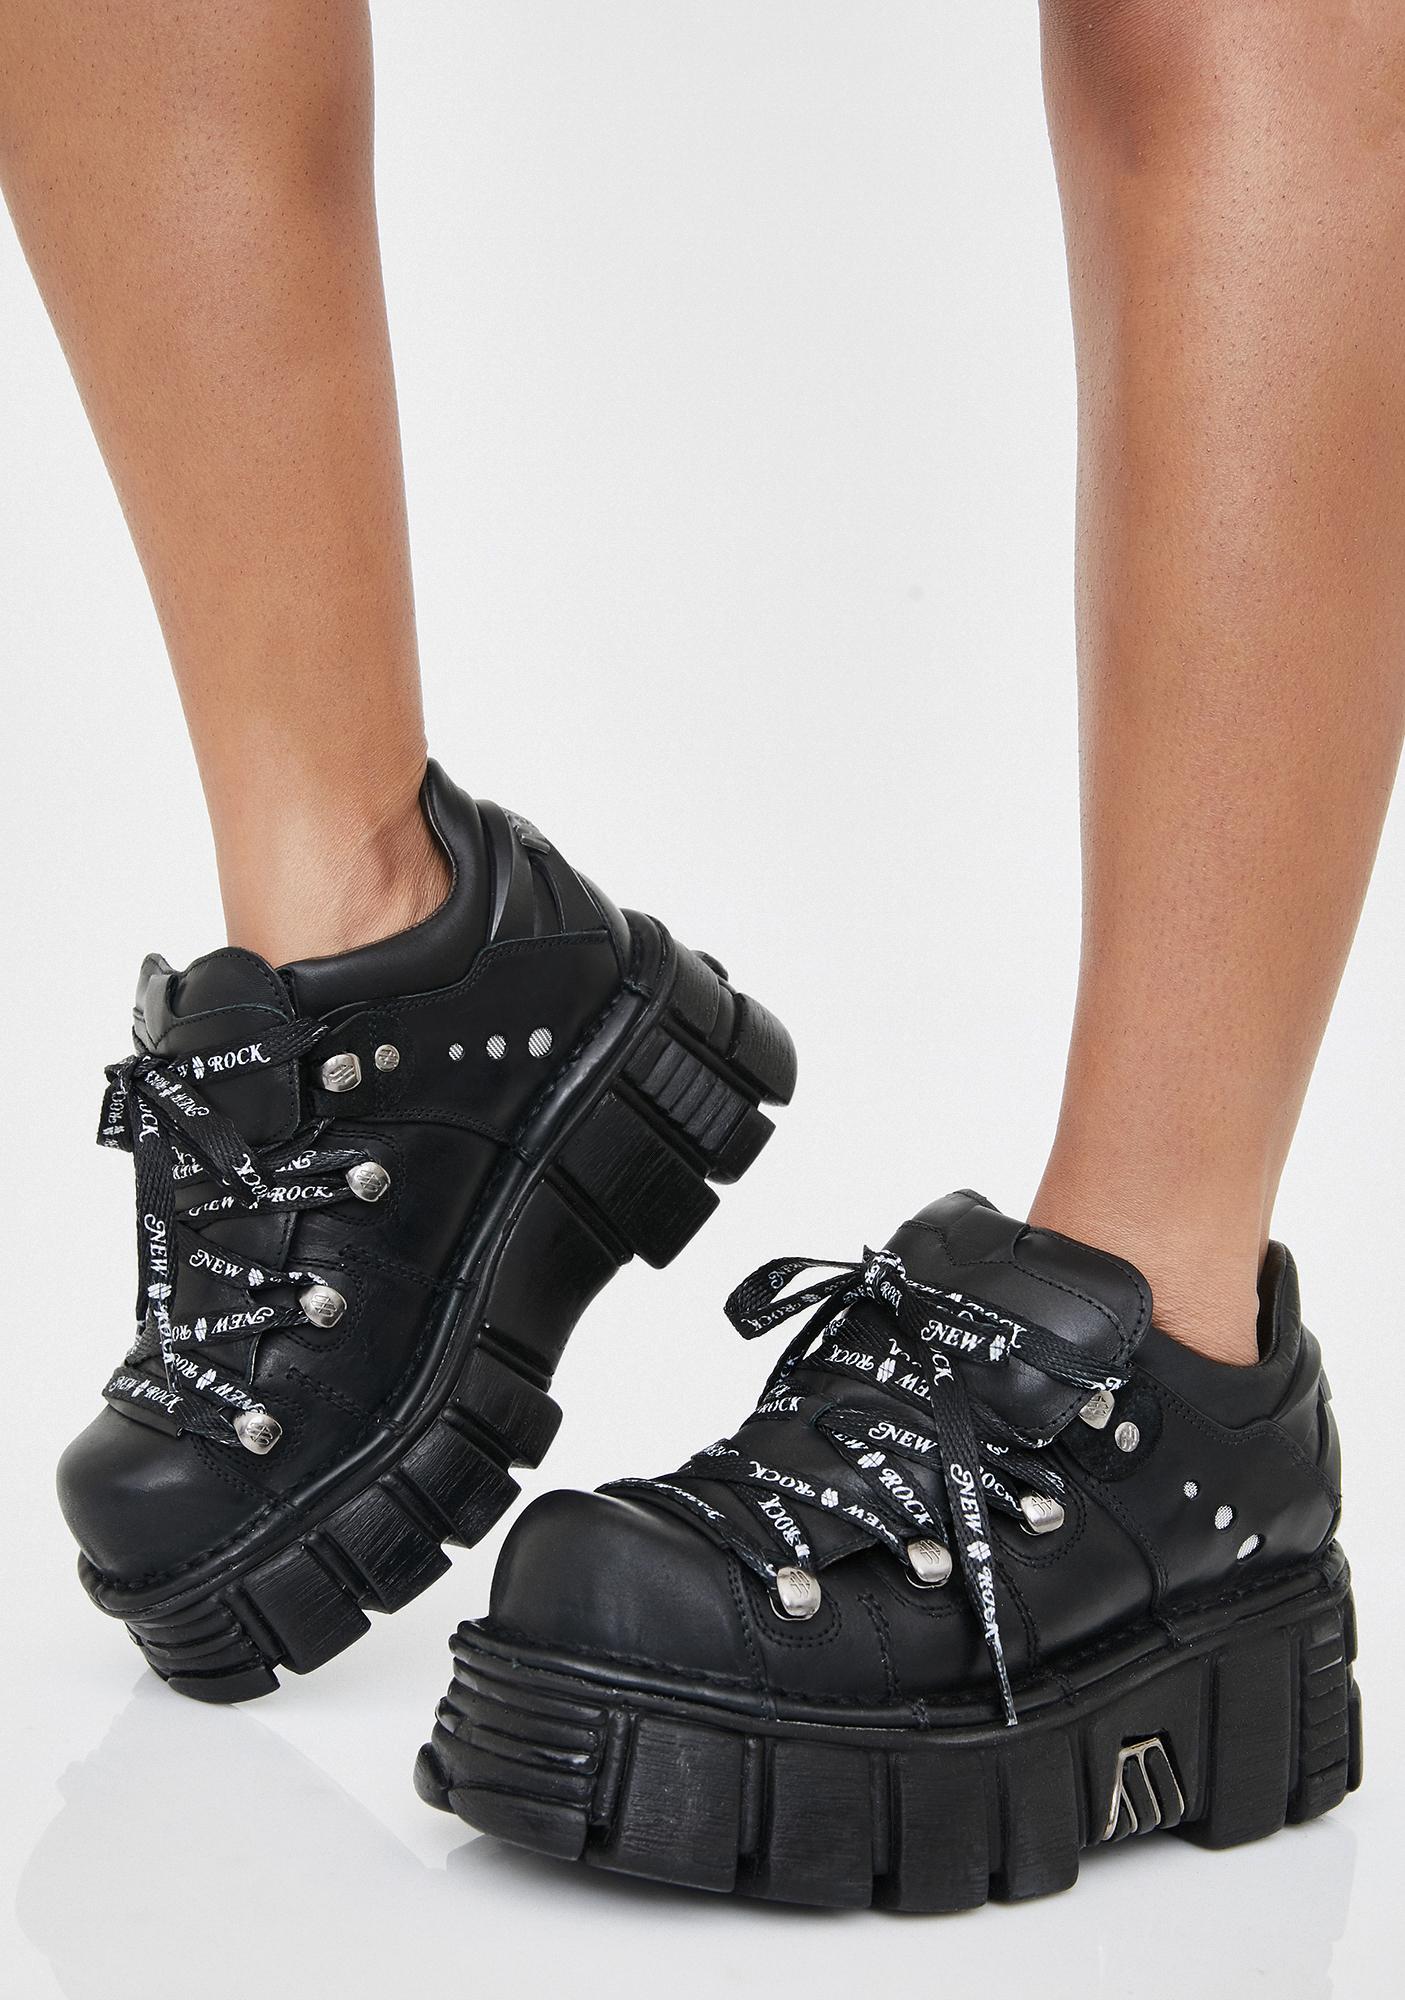 oasis black ankle boots